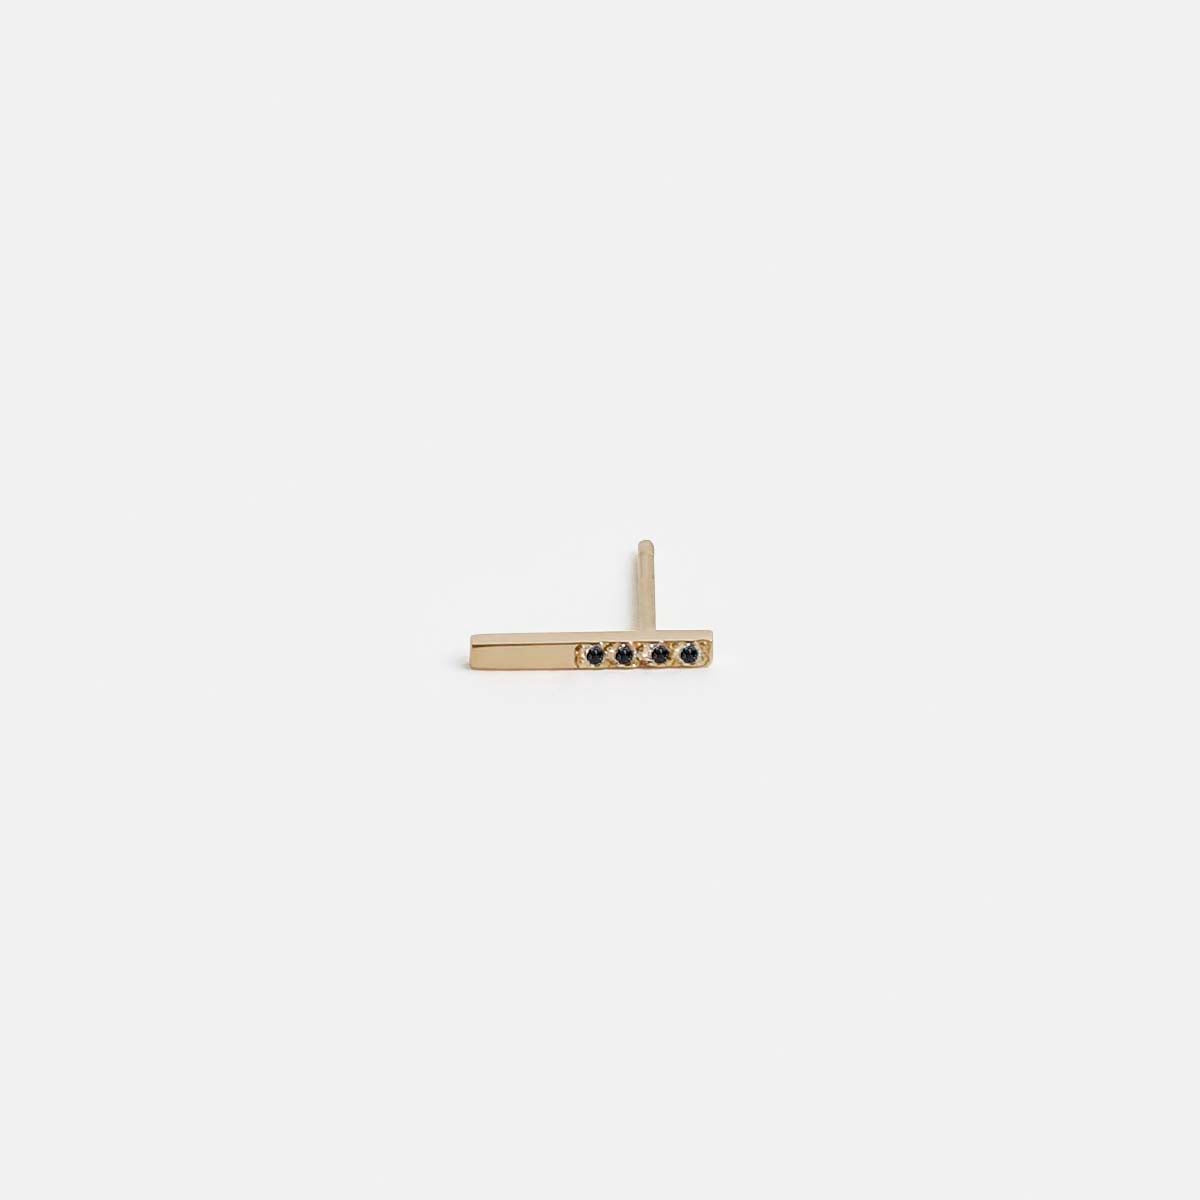 Iva Simple Studs in 14k Gold set with Black Diamonds By SHW Fine Jewelry NYC